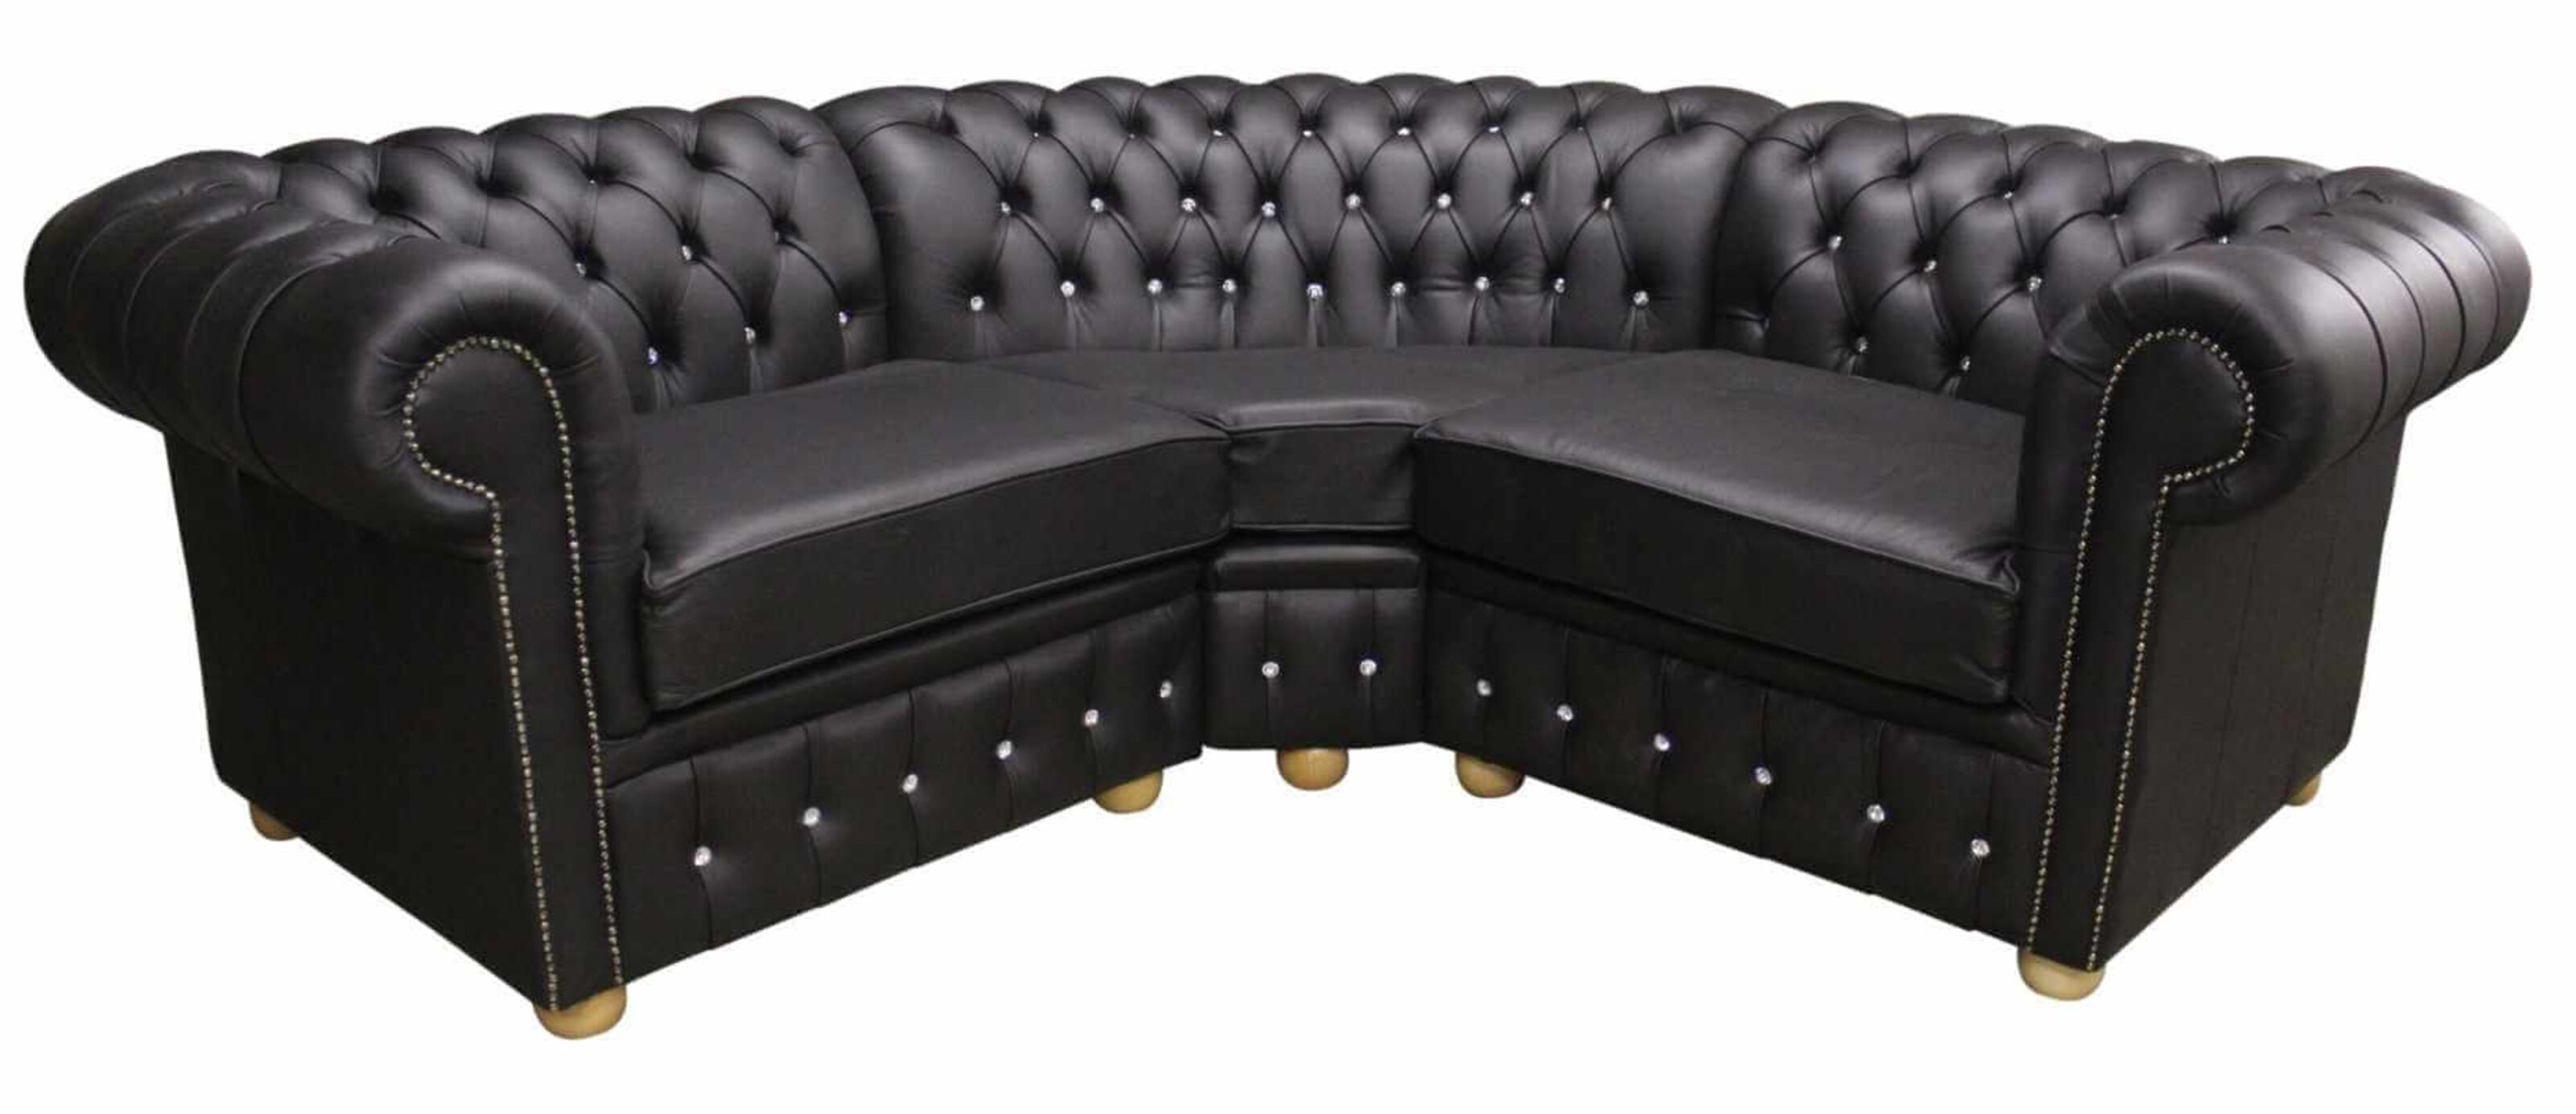 Deciding Between a Chesterfield and a Couch  %Post Title